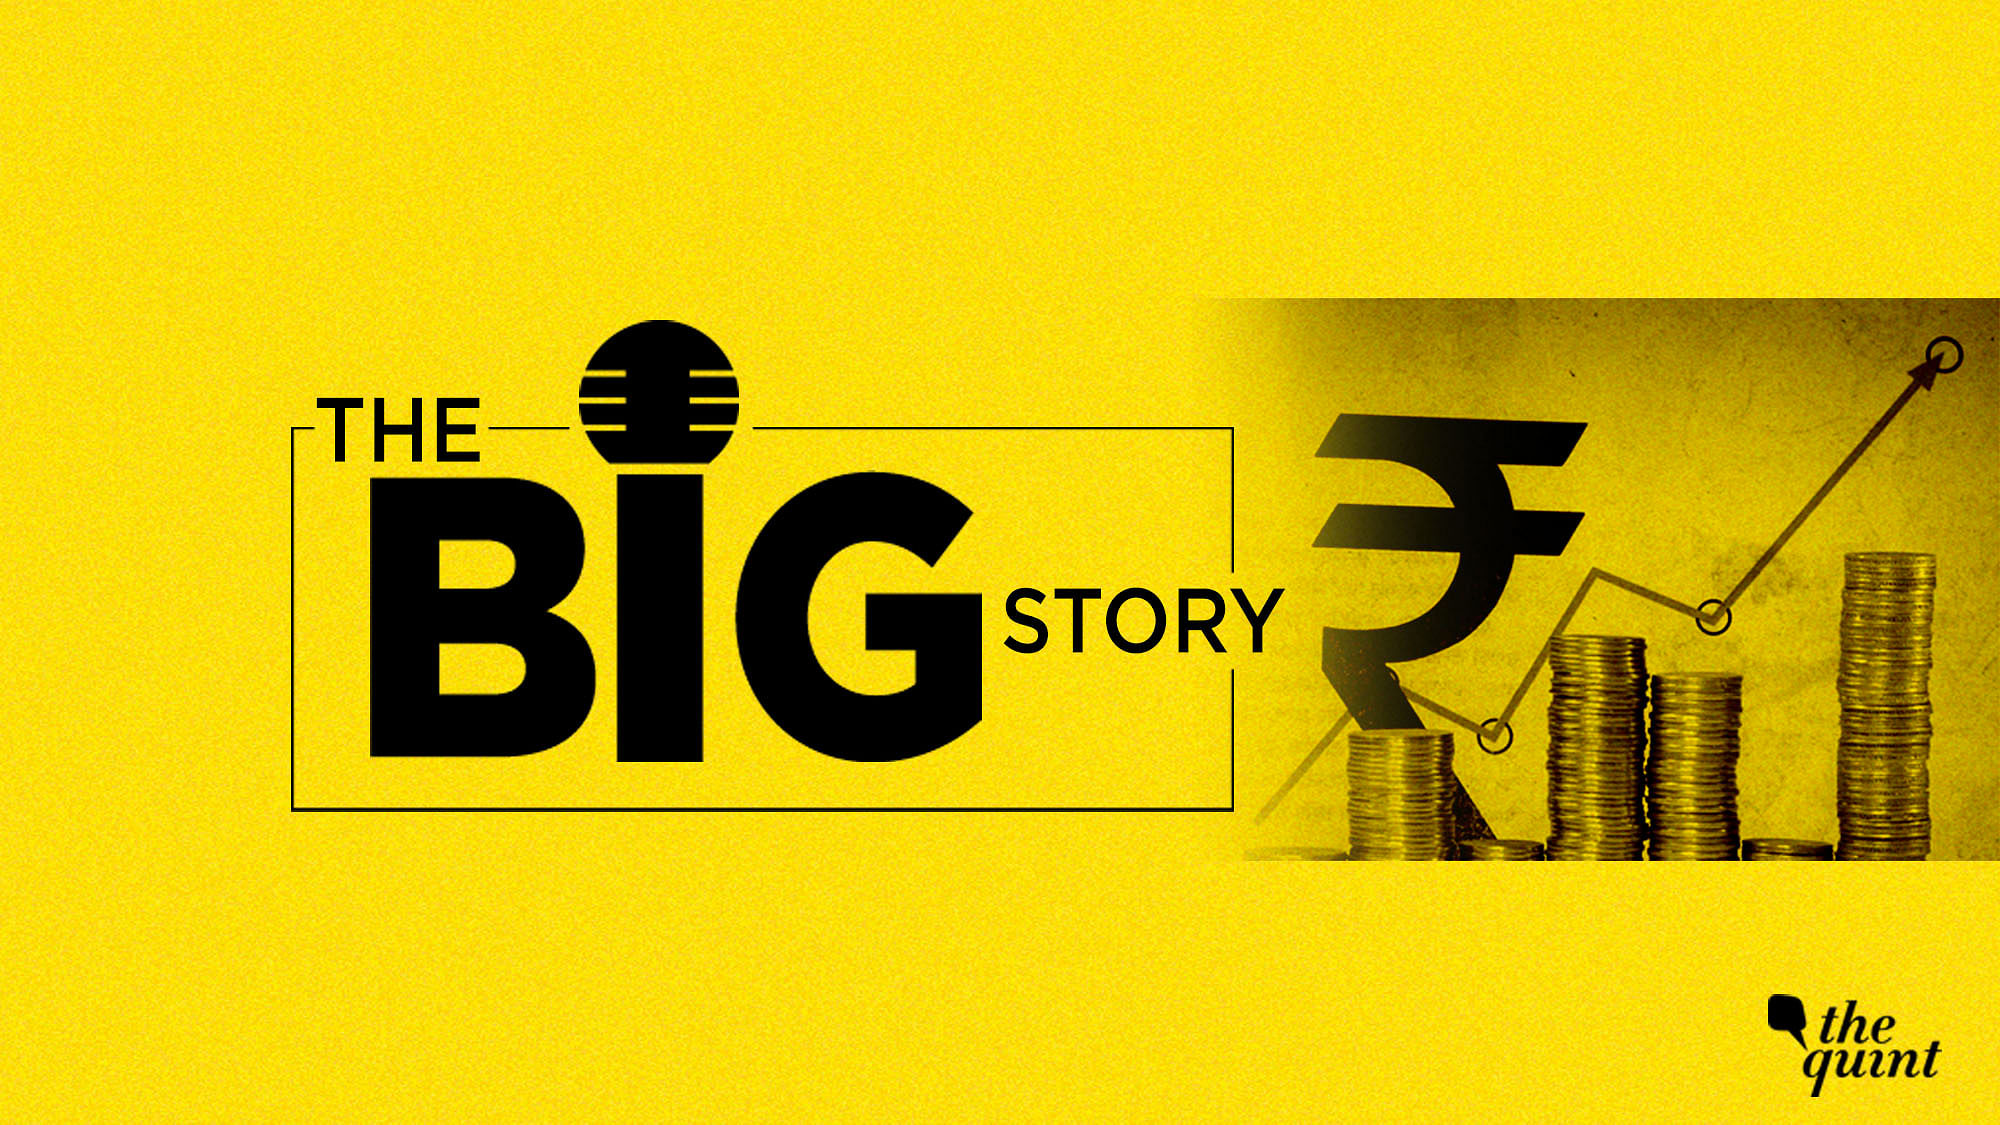 2019 is a little different for the survey. What’s different and what’s the gist of this survey? For all that tune in this episode of The Big Story podcast!